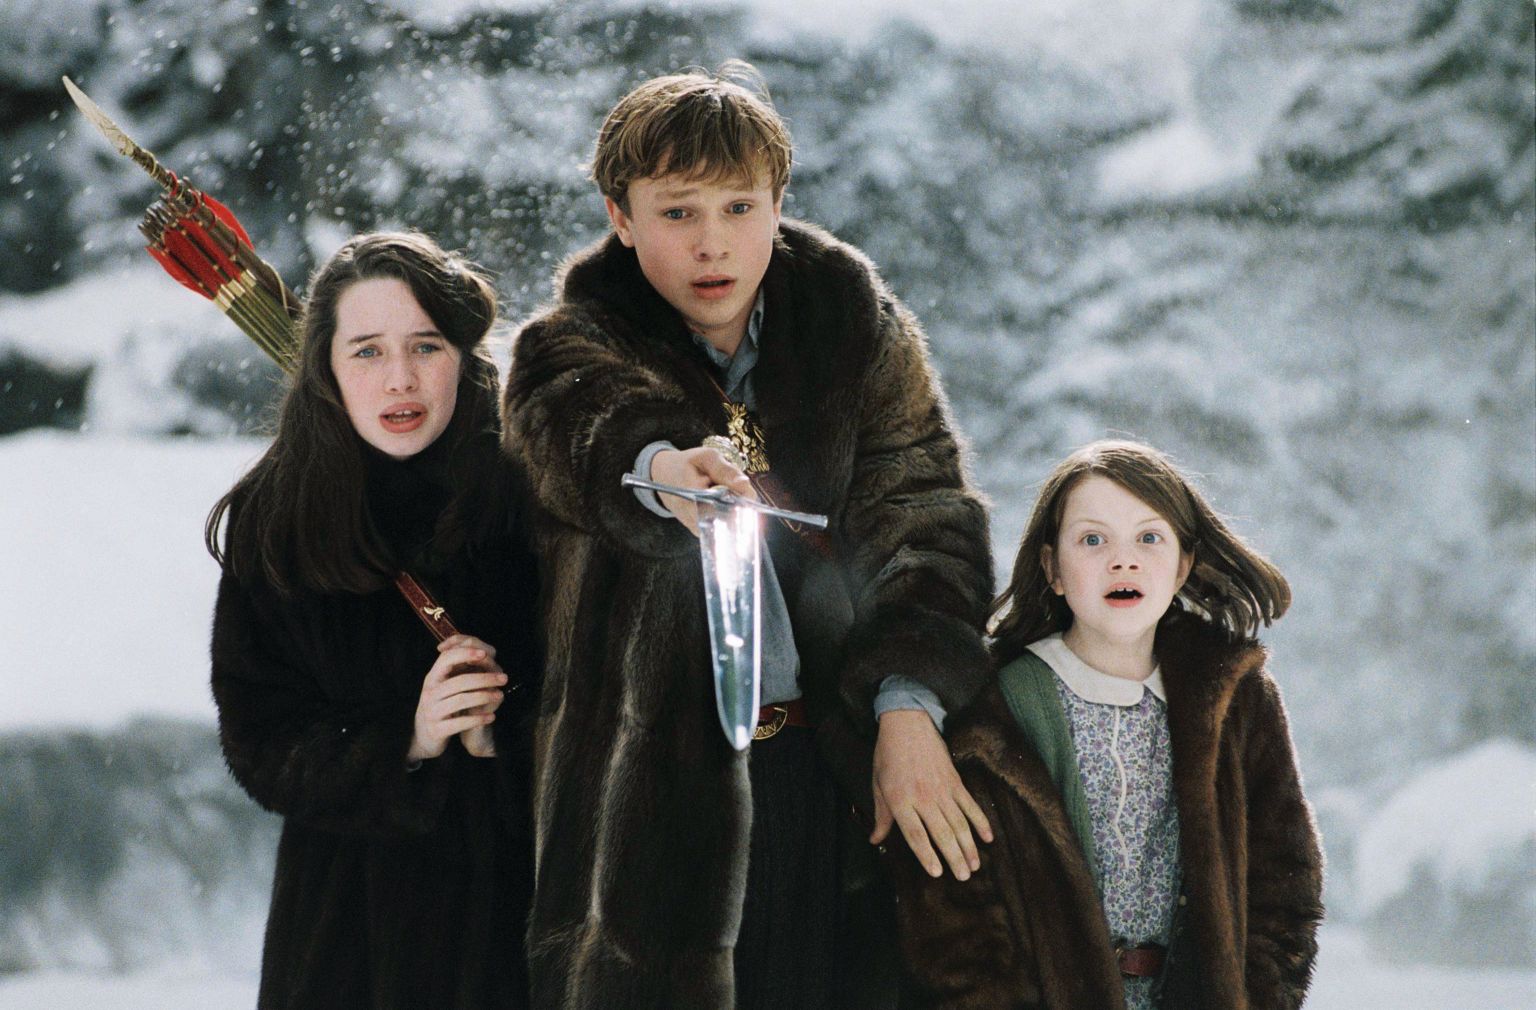 The Lion, the Witch and the Wardrobe Hi-Res Narnia Images from Disney - Narnia Fans